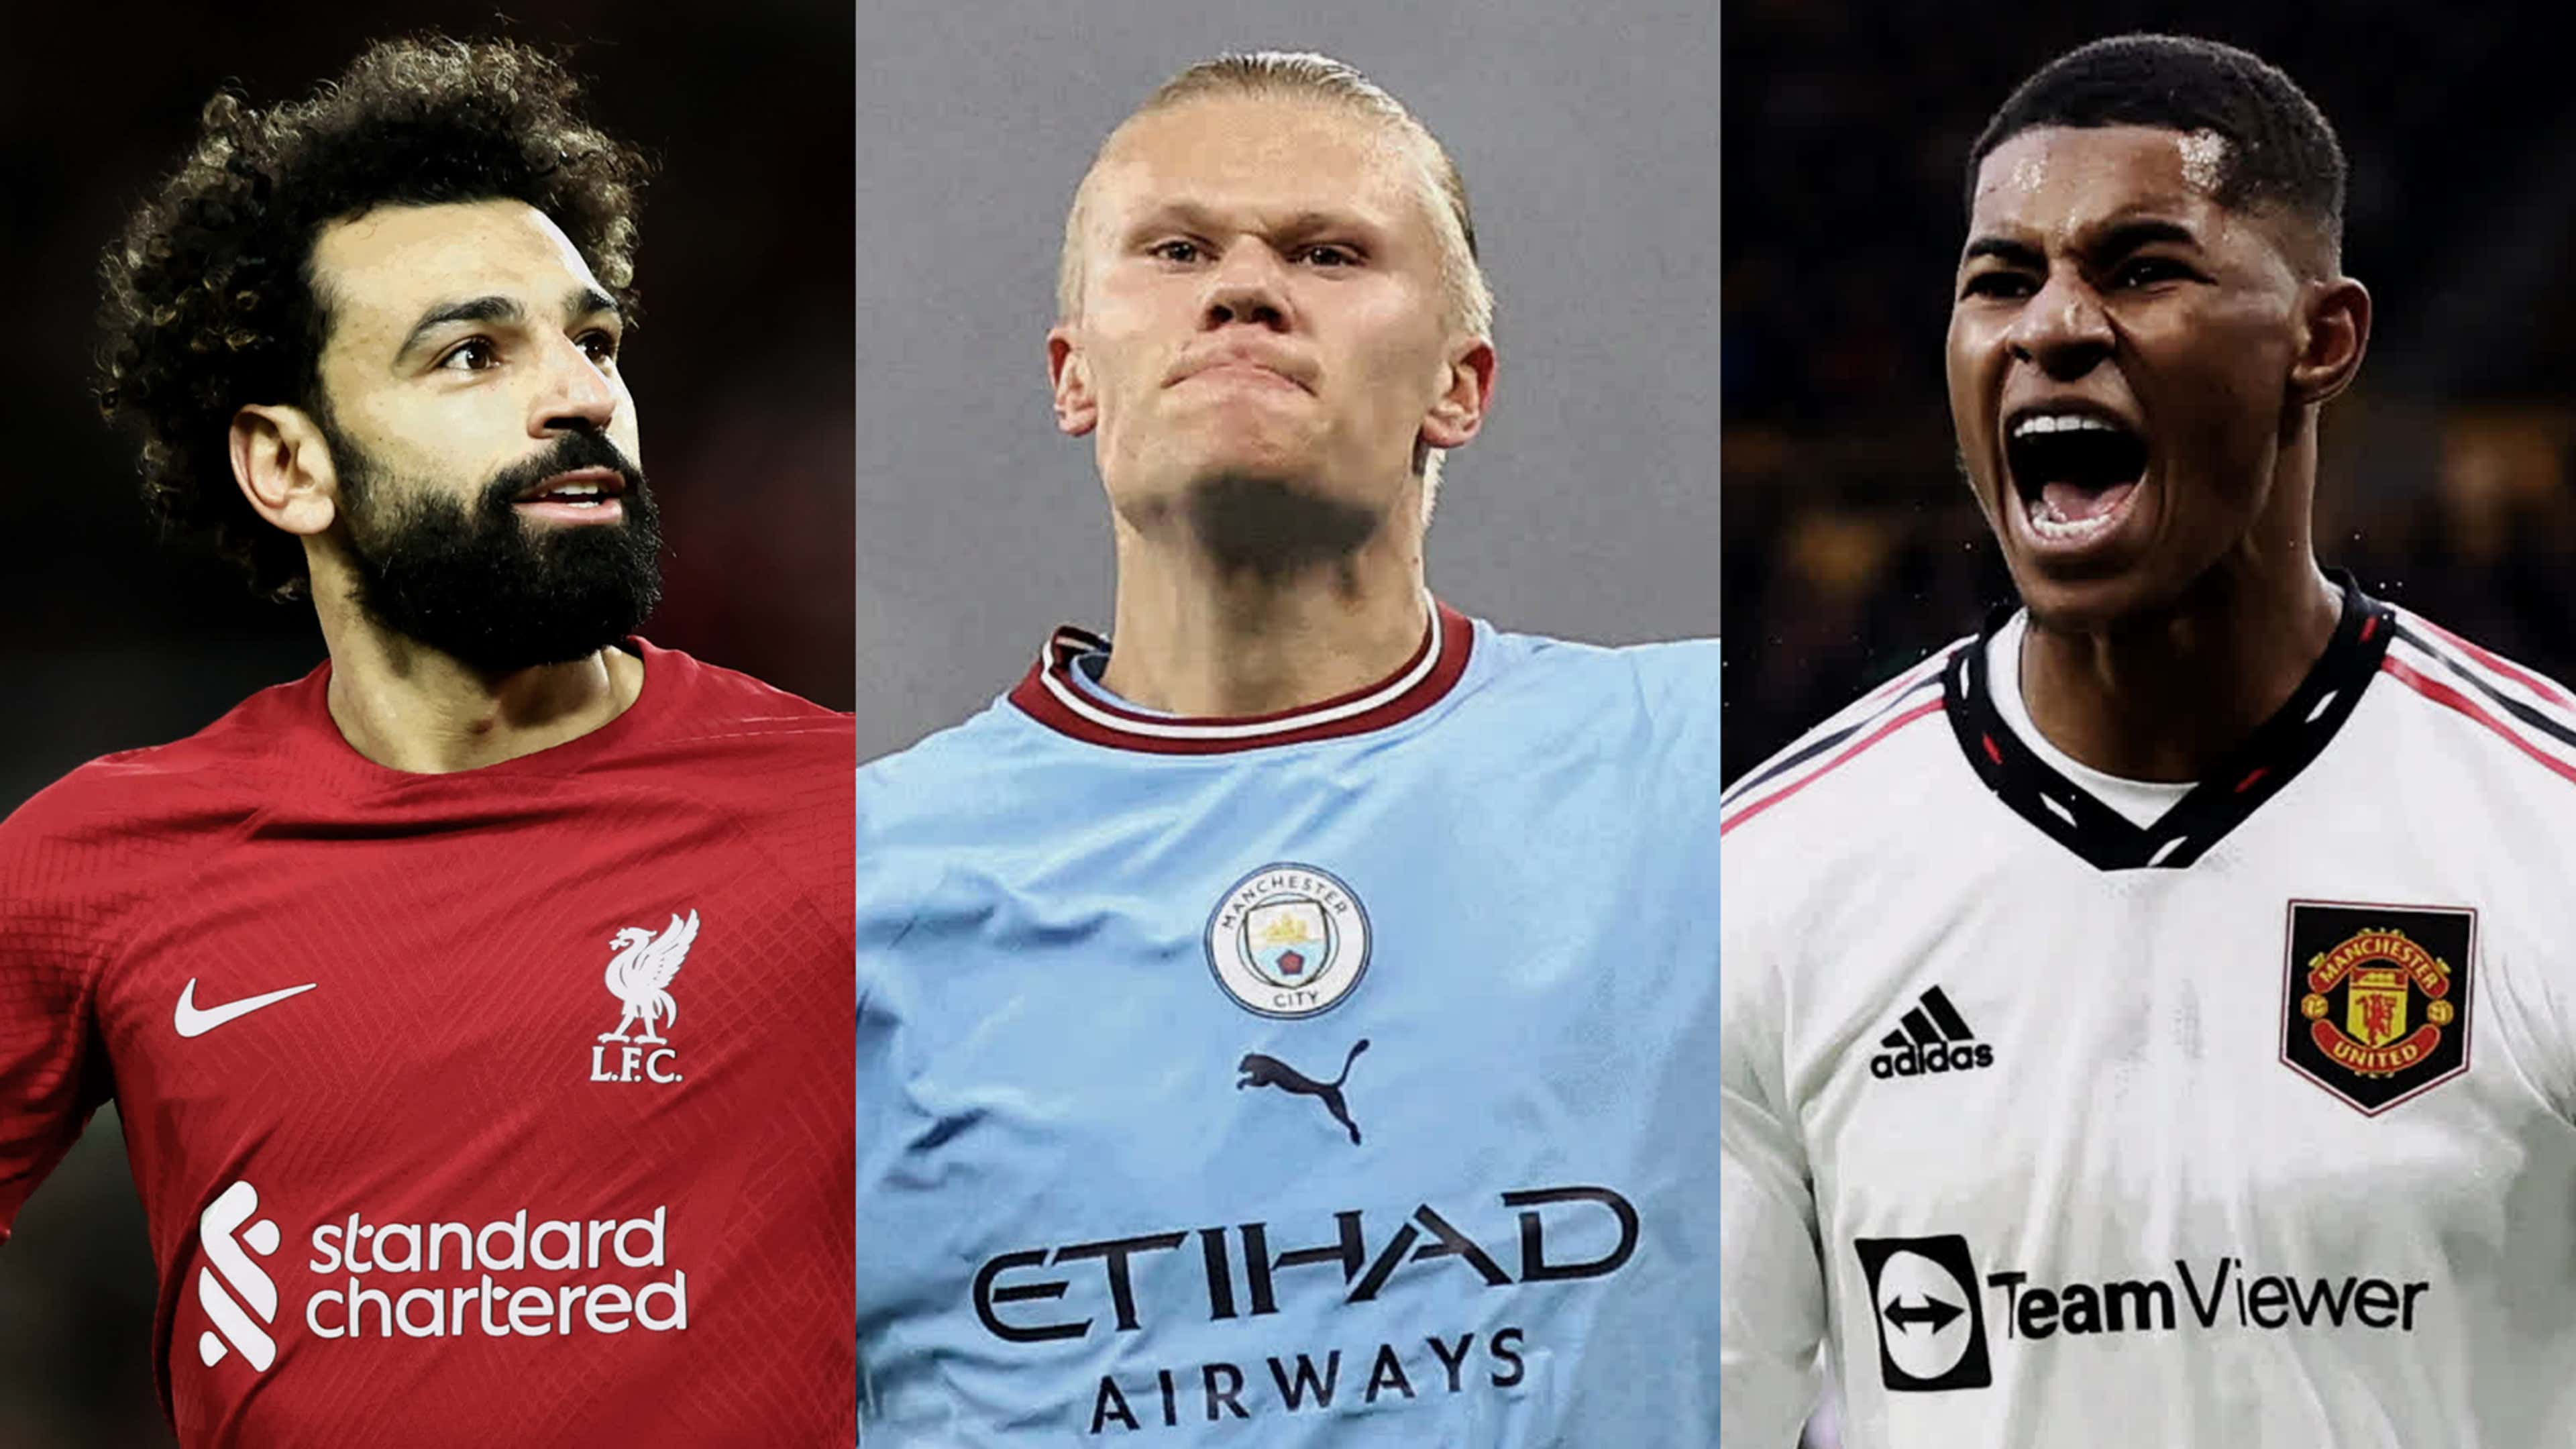 Who is richer between Man City and Liverpool?